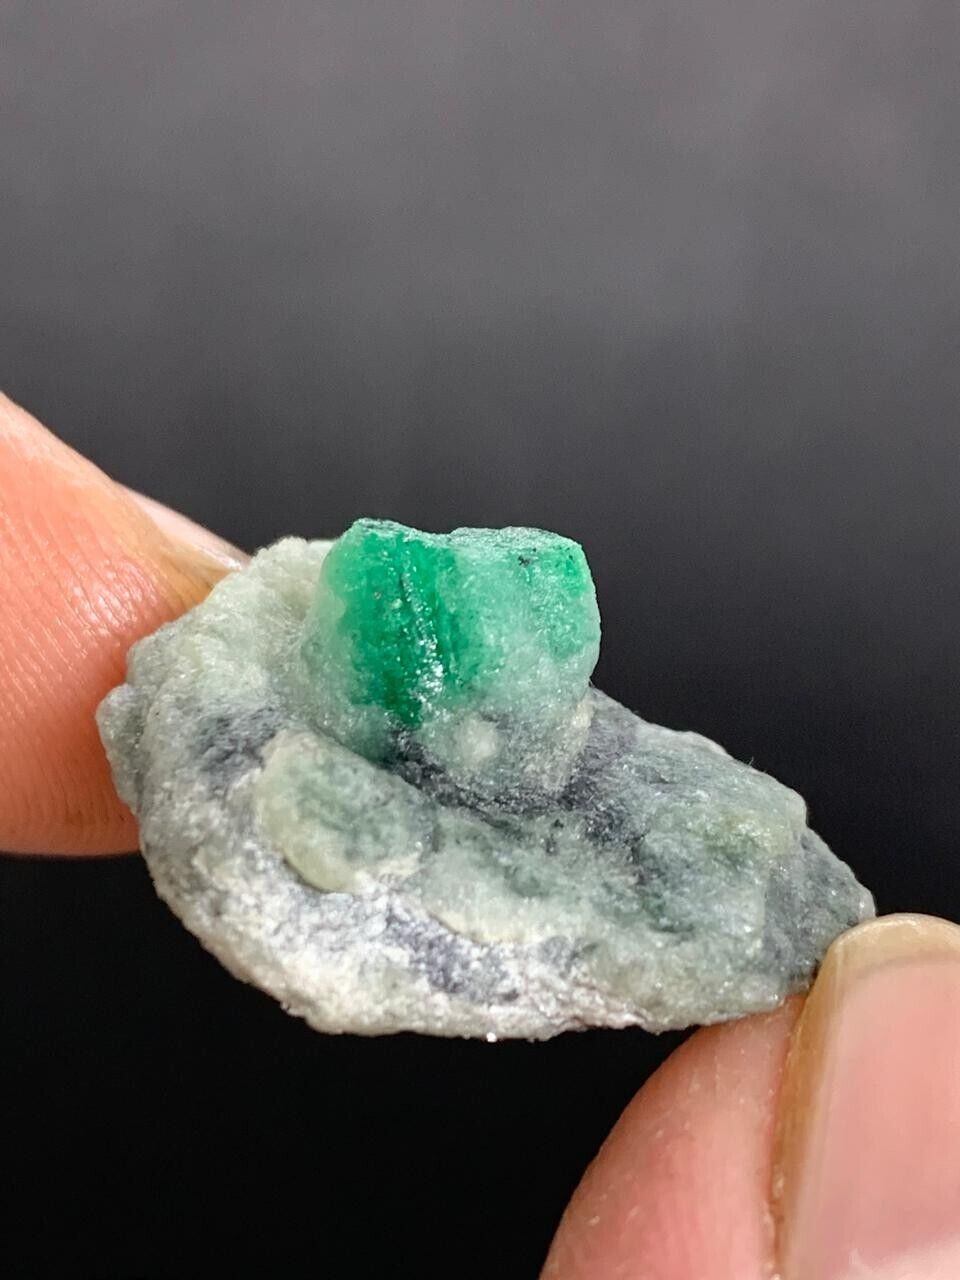 Natural Emerald Crystals With Matrix From Swat Pakistan, 85 CT Mineral Specimen